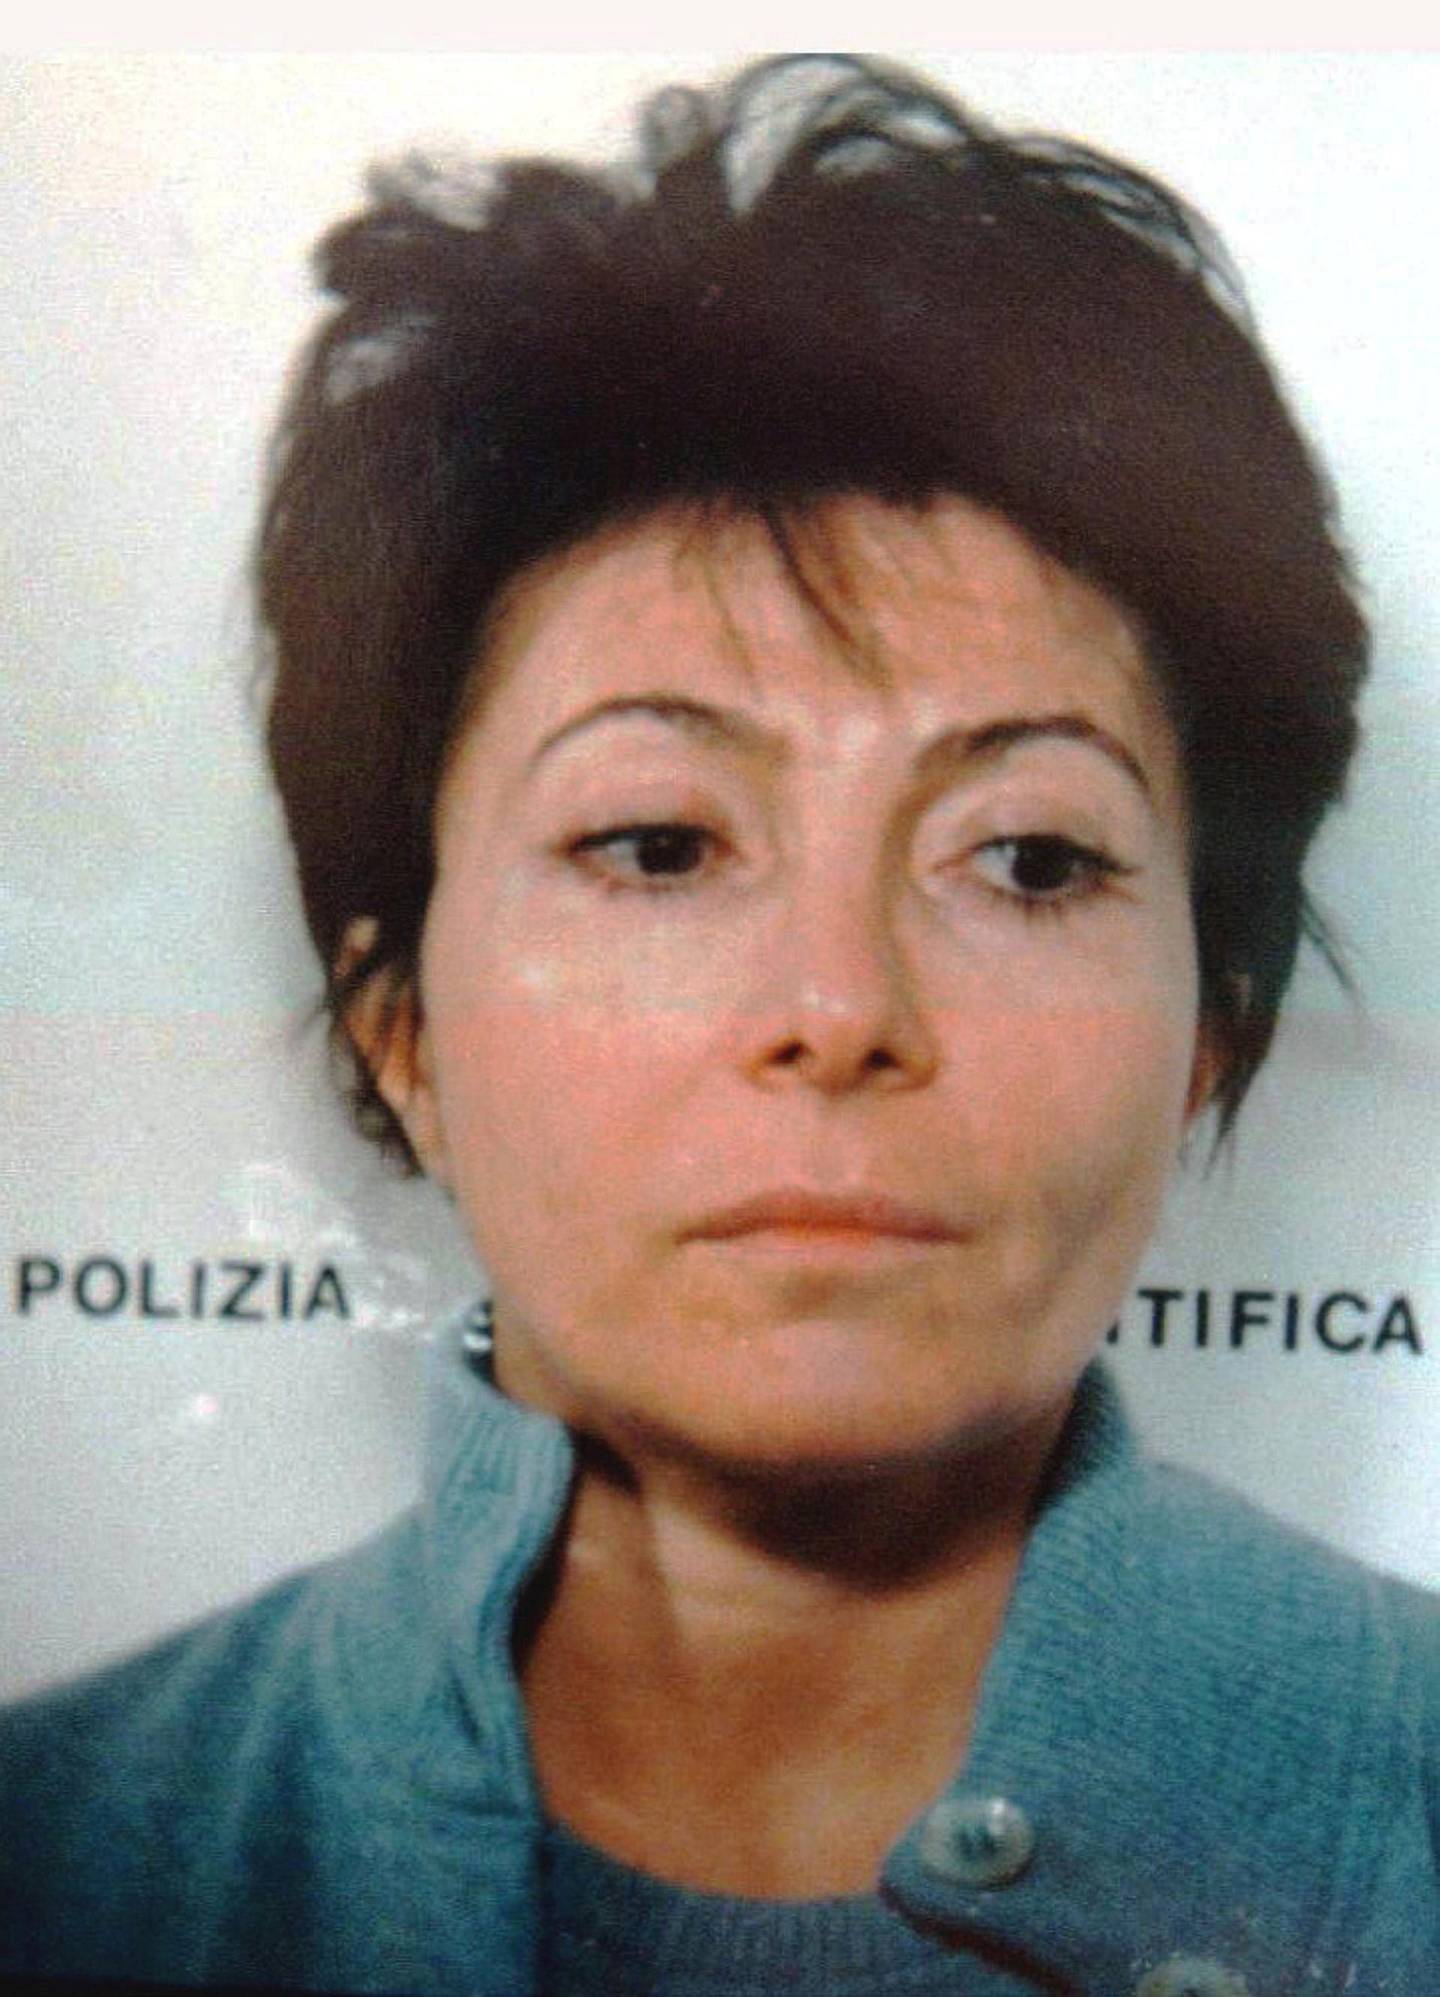 Patrizia Reggiani Martinelli, first wife of Maurizio Gucci, the heir to the Gucci fashion empire, waits to be questioned by judges inside S.Vittore prison 01 February. Martinelli was arrested among four other people in connection with the designer's murder two years ago. Judical sources said Martinelli, who is living in Switzerland, ordered the 1995 killing of her late husband. *** Local Caption *** 99384475